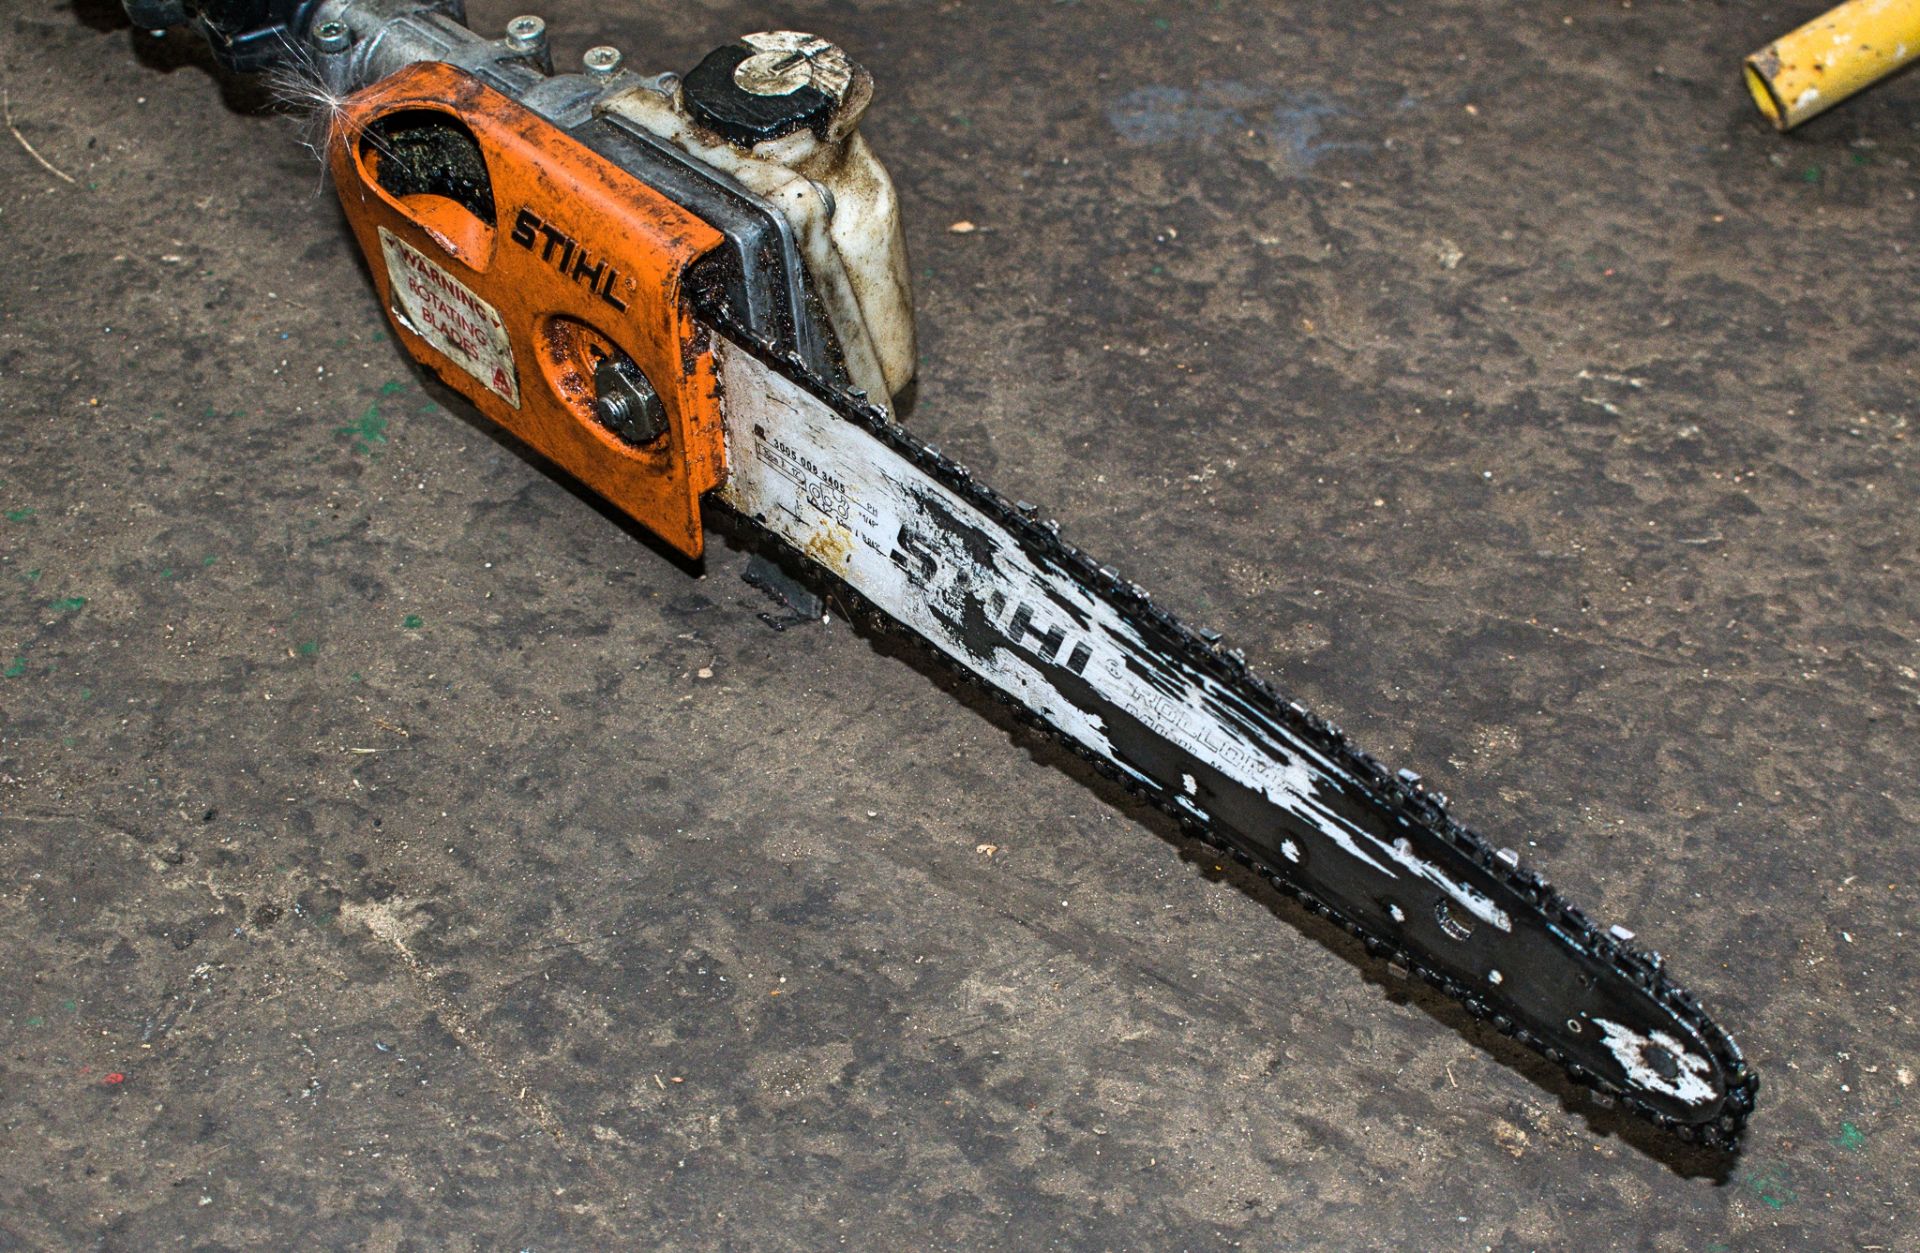 Stihl HT101 petrol driven long reach chainsaw A665310 - Image 2 of 2